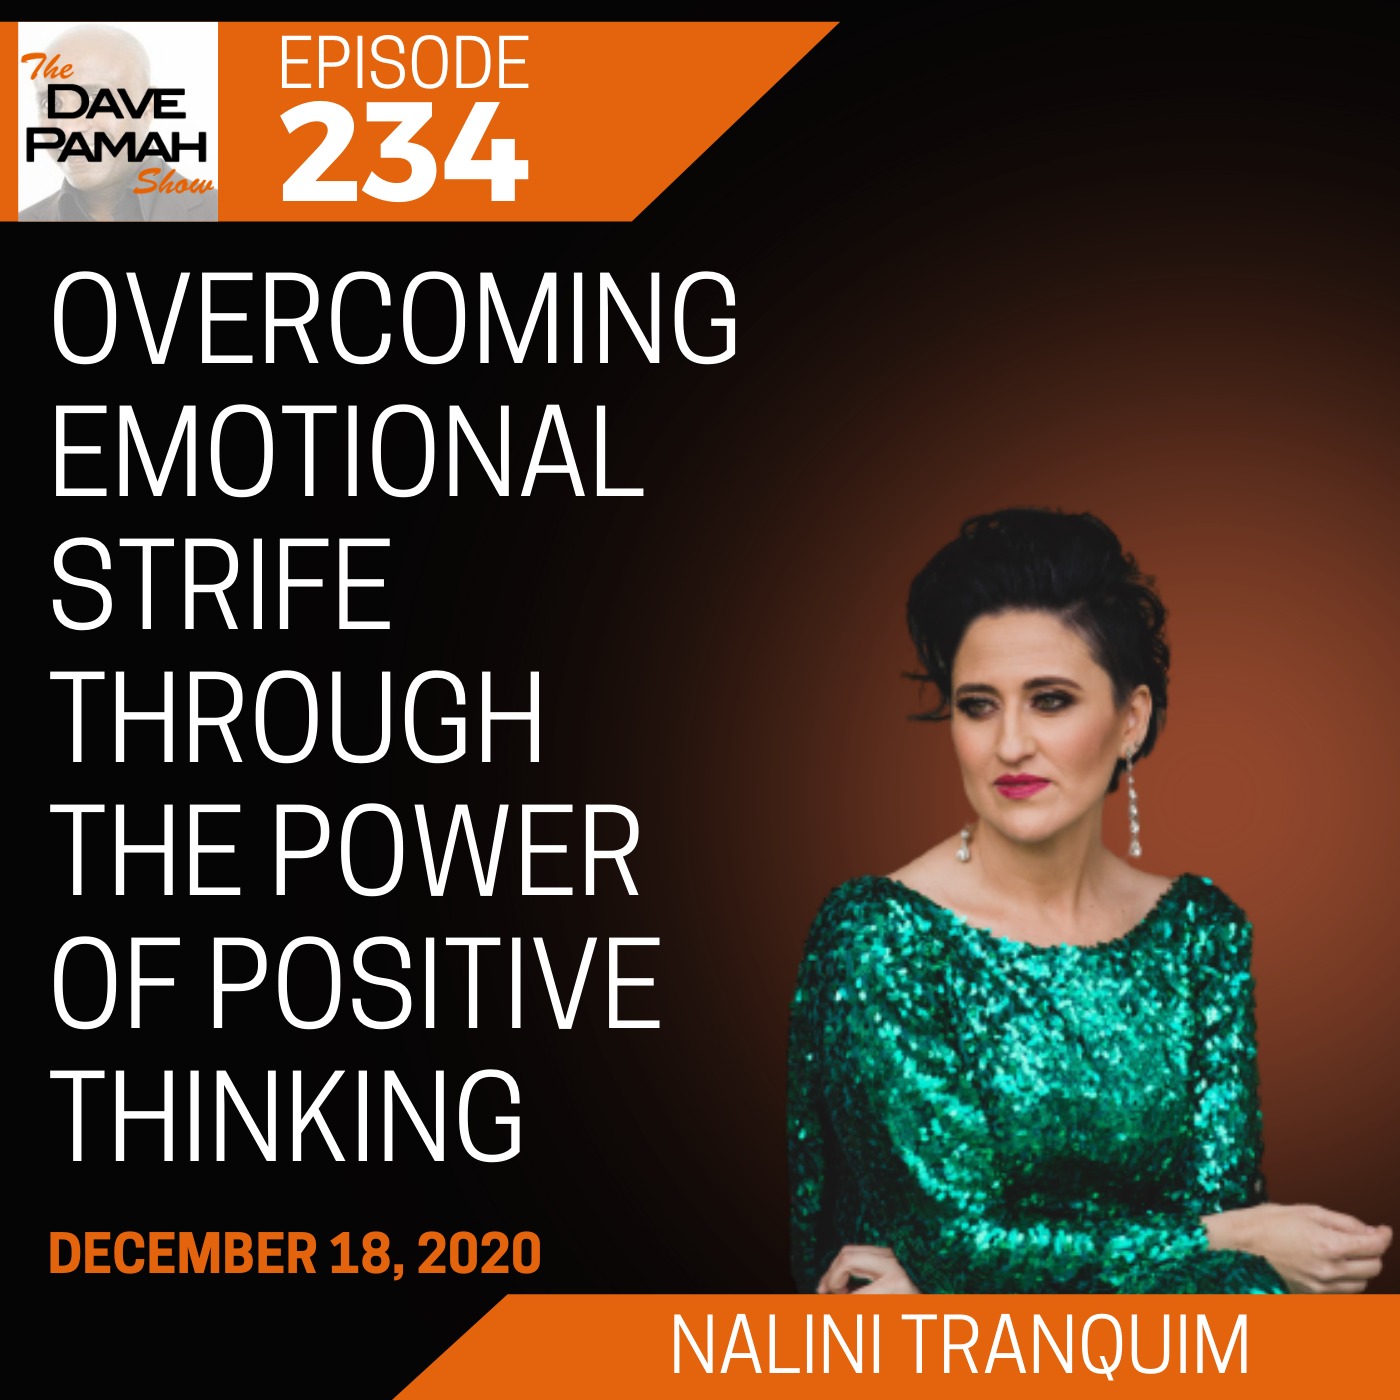 Overcoming emotional strife through the power of positive thinking with Nalini Tranquim Image